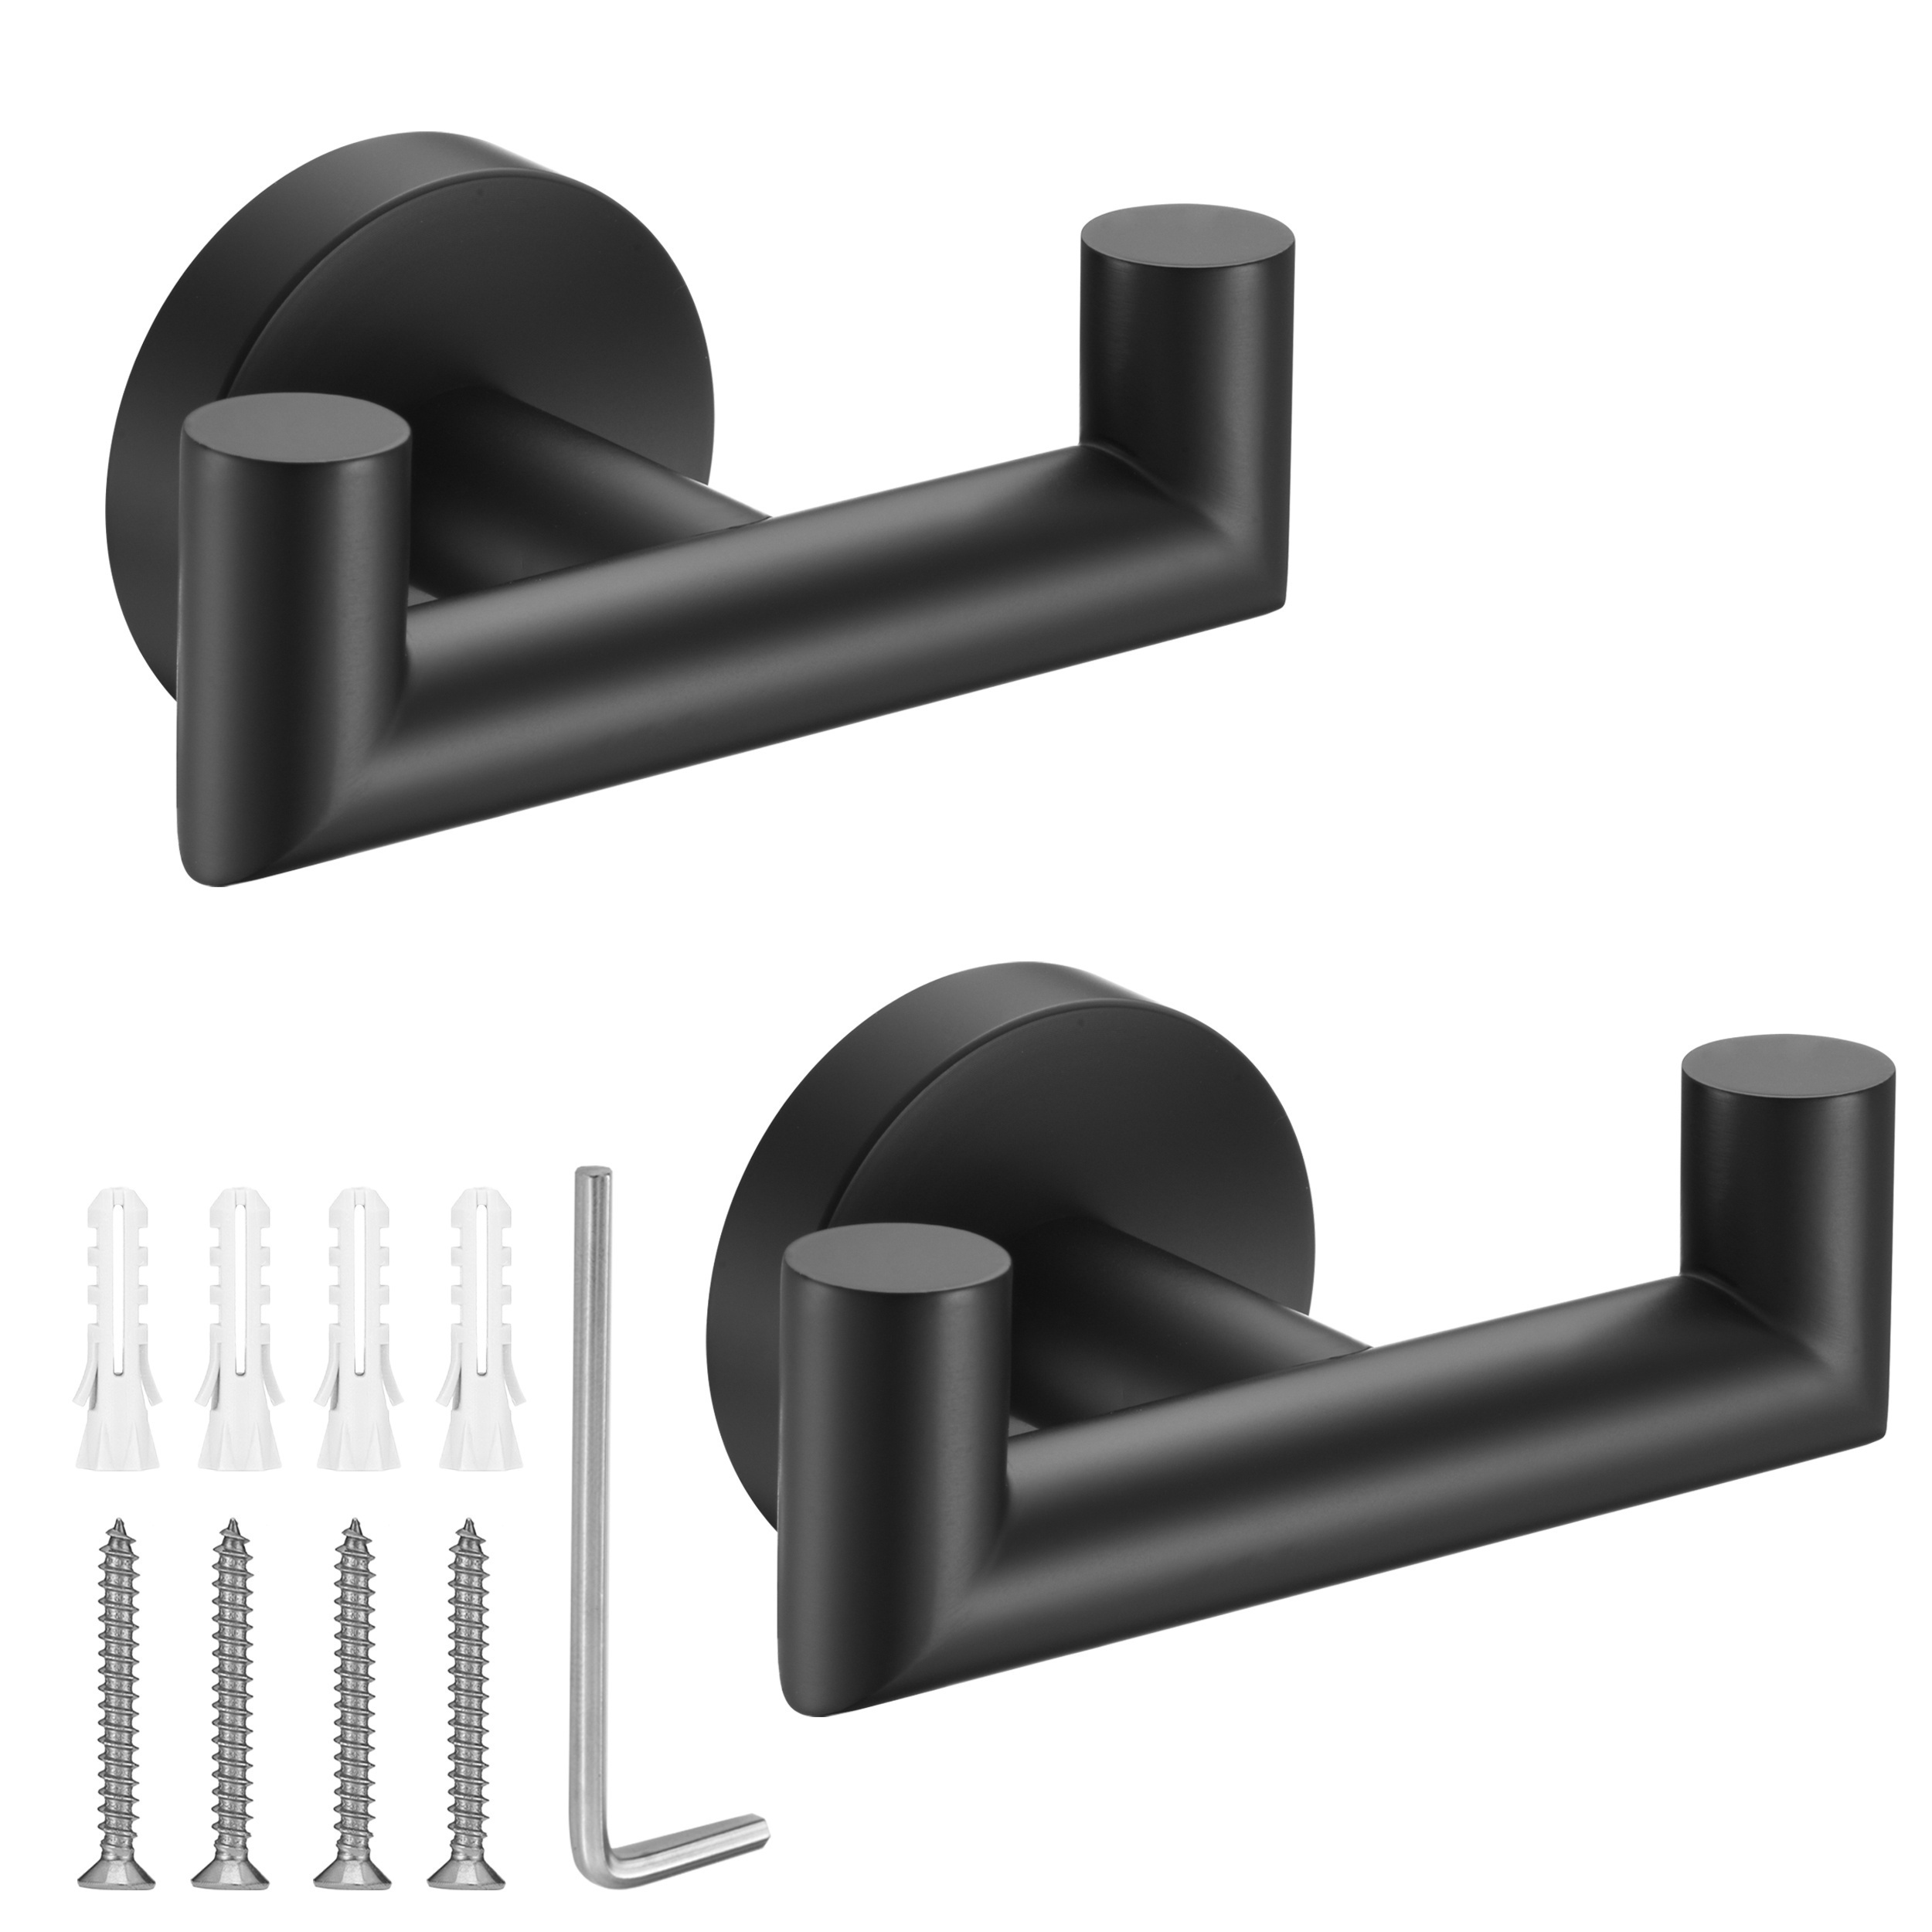 

2pcs Towel Hooks, Towel Hooks For Kitchen Bathroom, Sus304 Stainless Steel Coat Hooks, Heavy Duty Double Towels Holder Hooks For Hanging Towels, Coats, Sponges, Clothes, Wall Mount